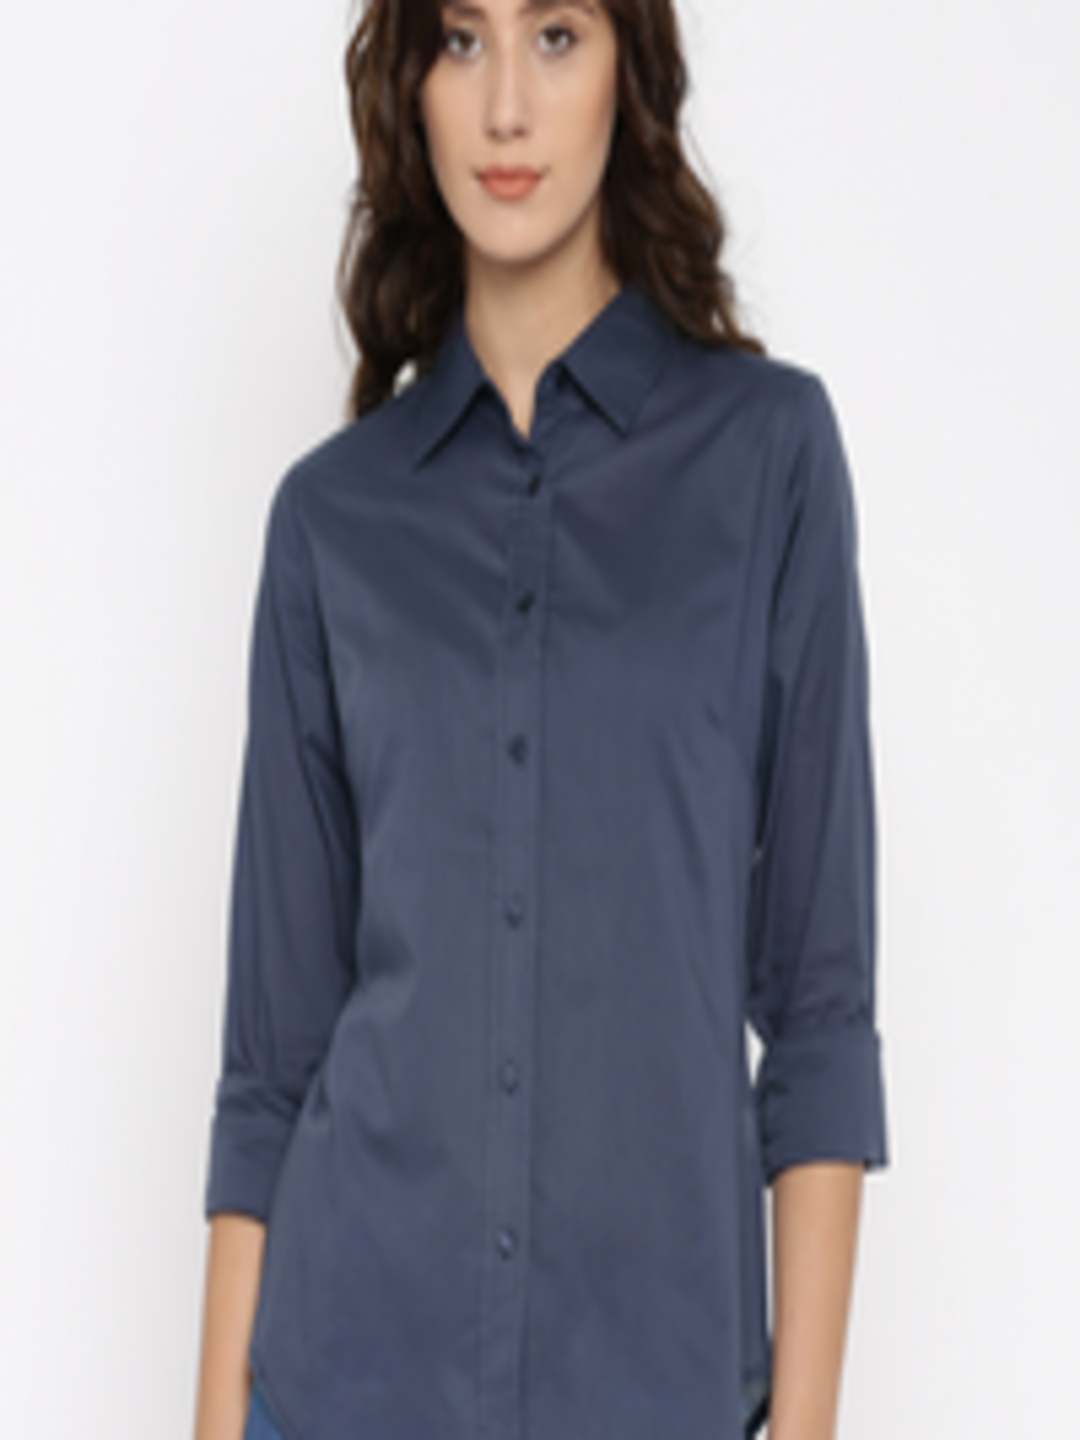 Buy Silly People Women Navy Blue Casual Shirt - Shirts for Women